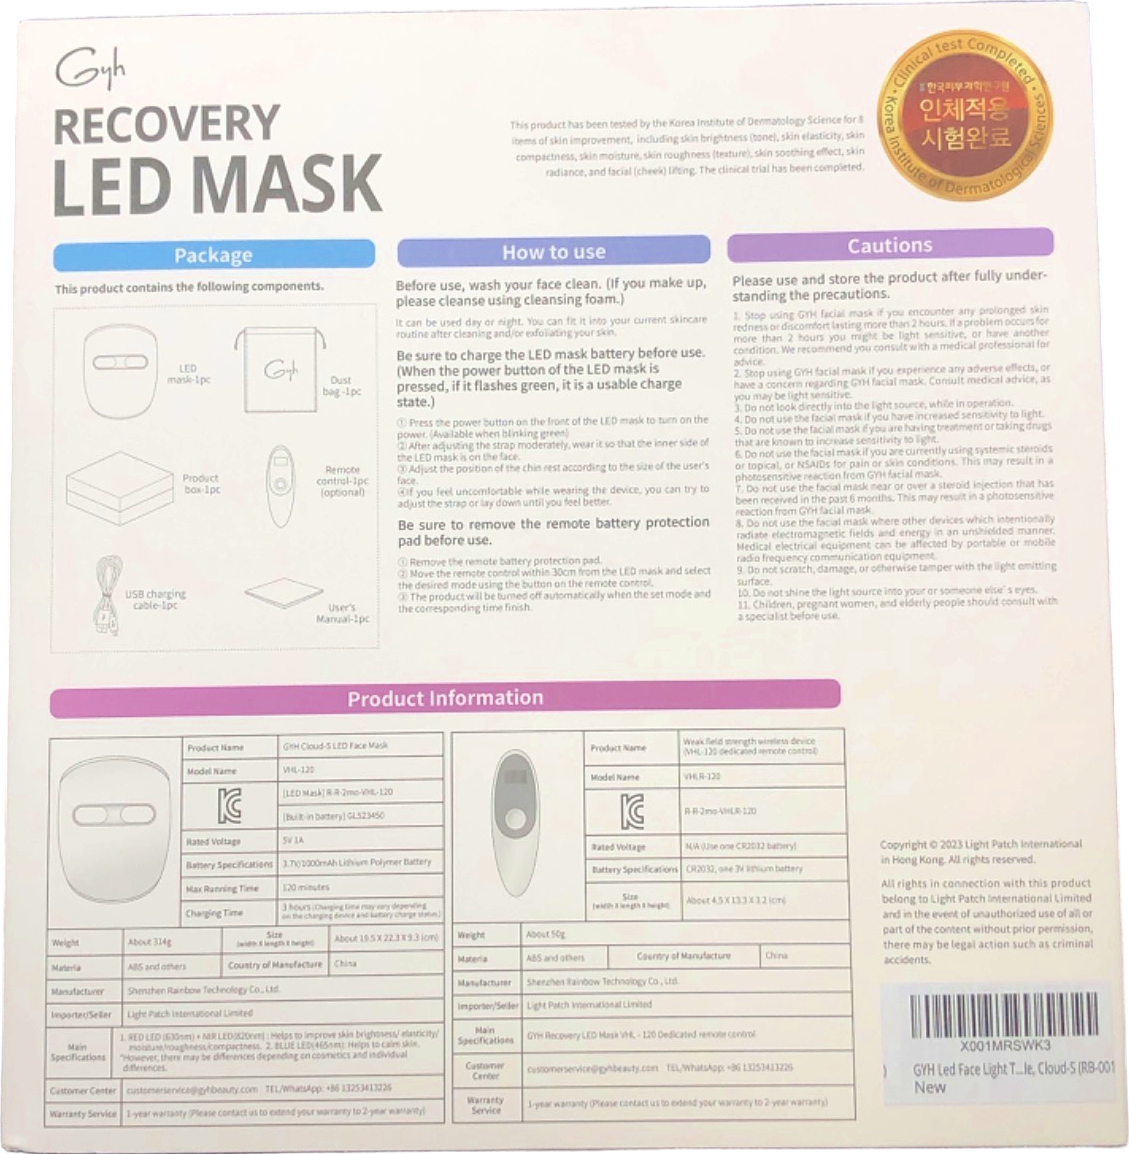 Gyh Cloud-S Recovery LED Mask